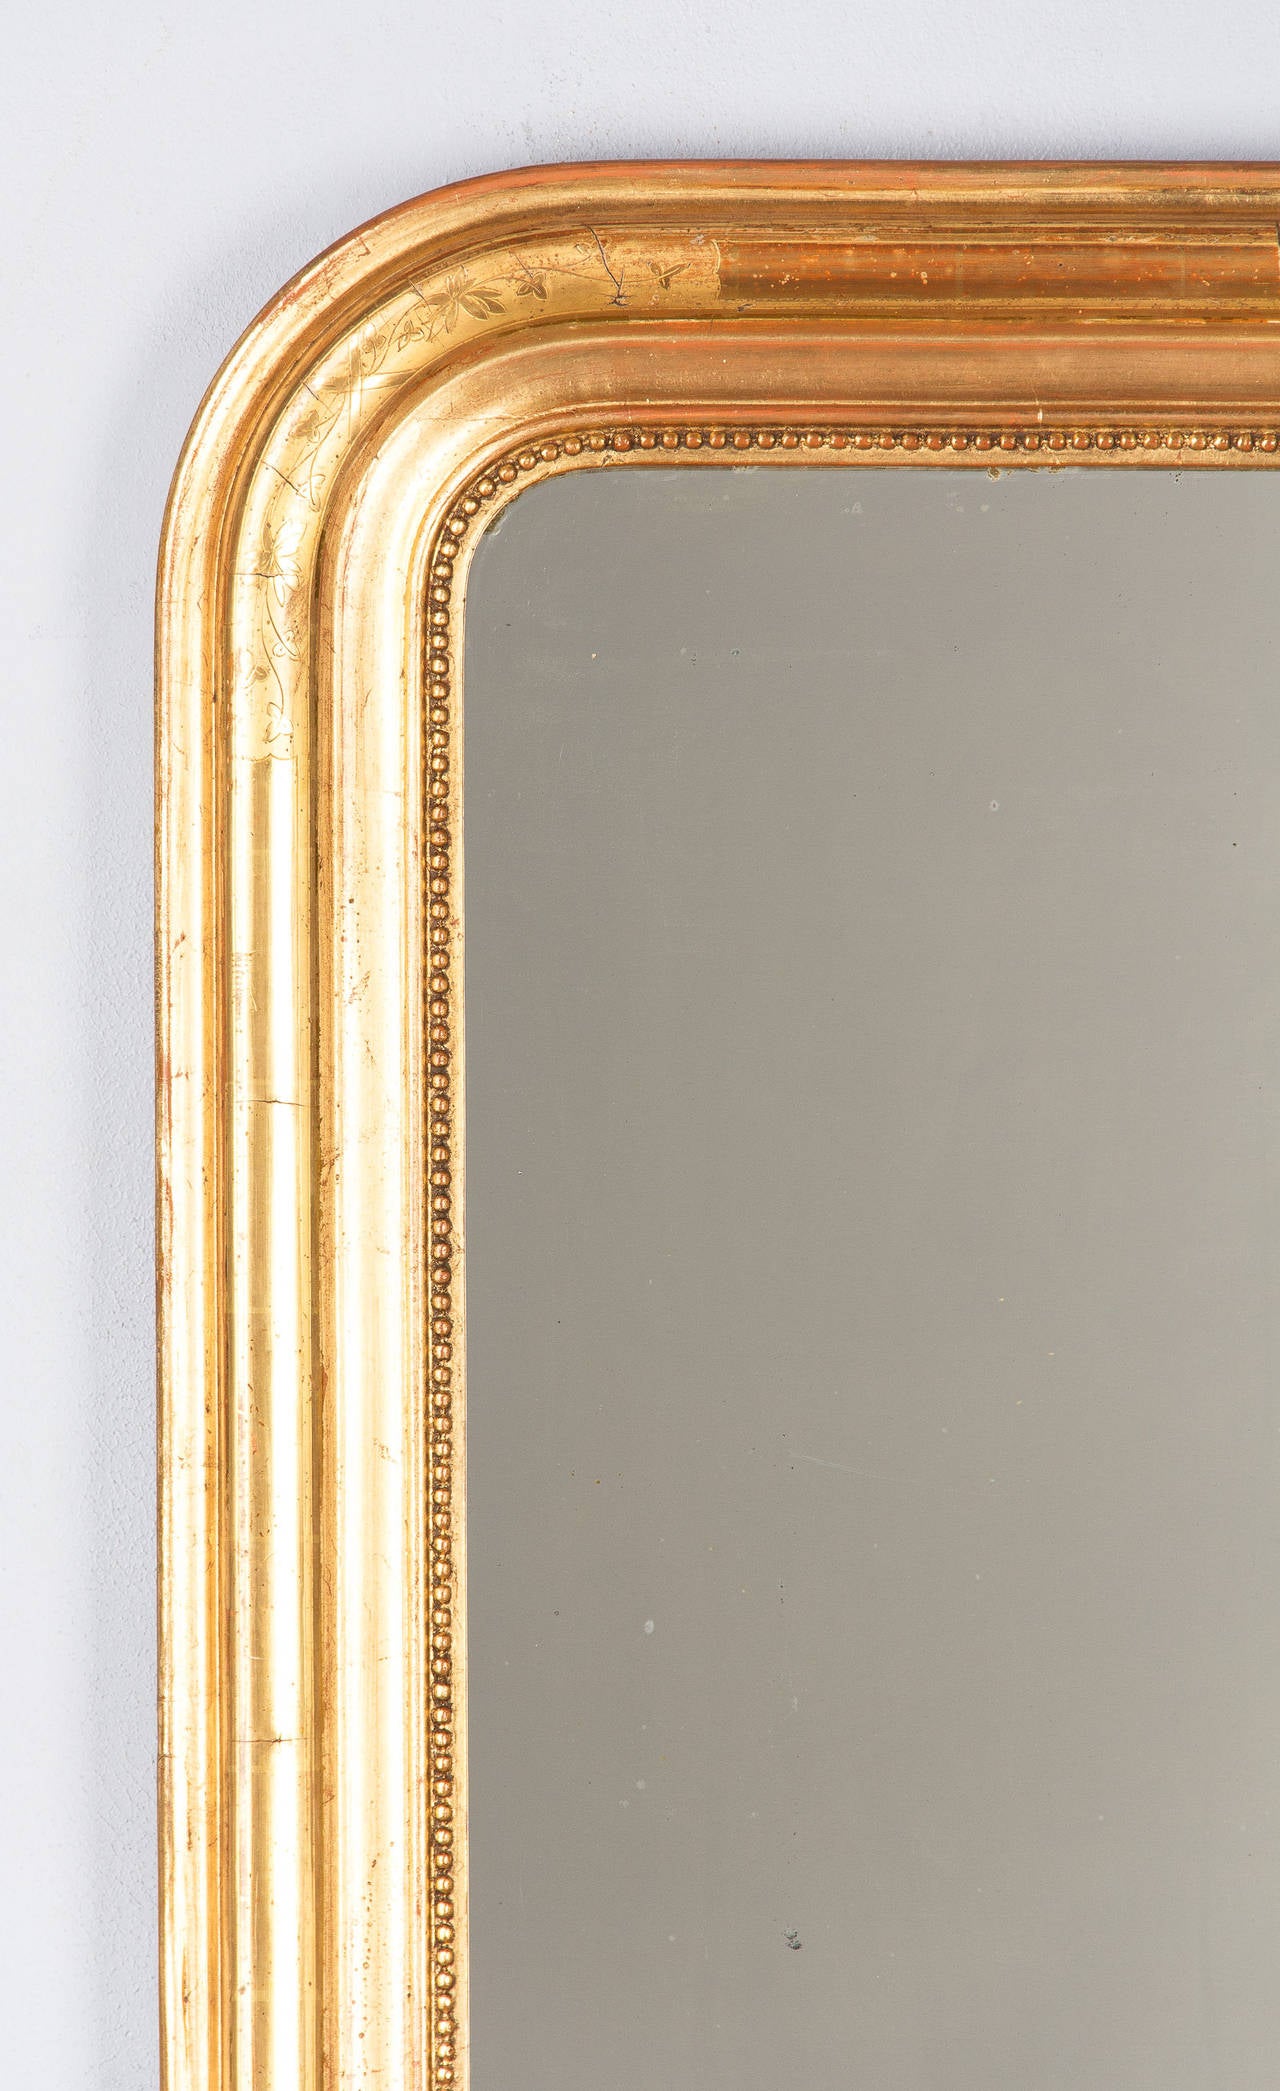 A lovely Gilded Mirror from the Louis Philippe Period, mid-1800s. The gold leaf wooden frame has a triple molding and is rounded at top, featuring subtle floral design at corners and a beaded trim around the glass. The mirrored glass is original.